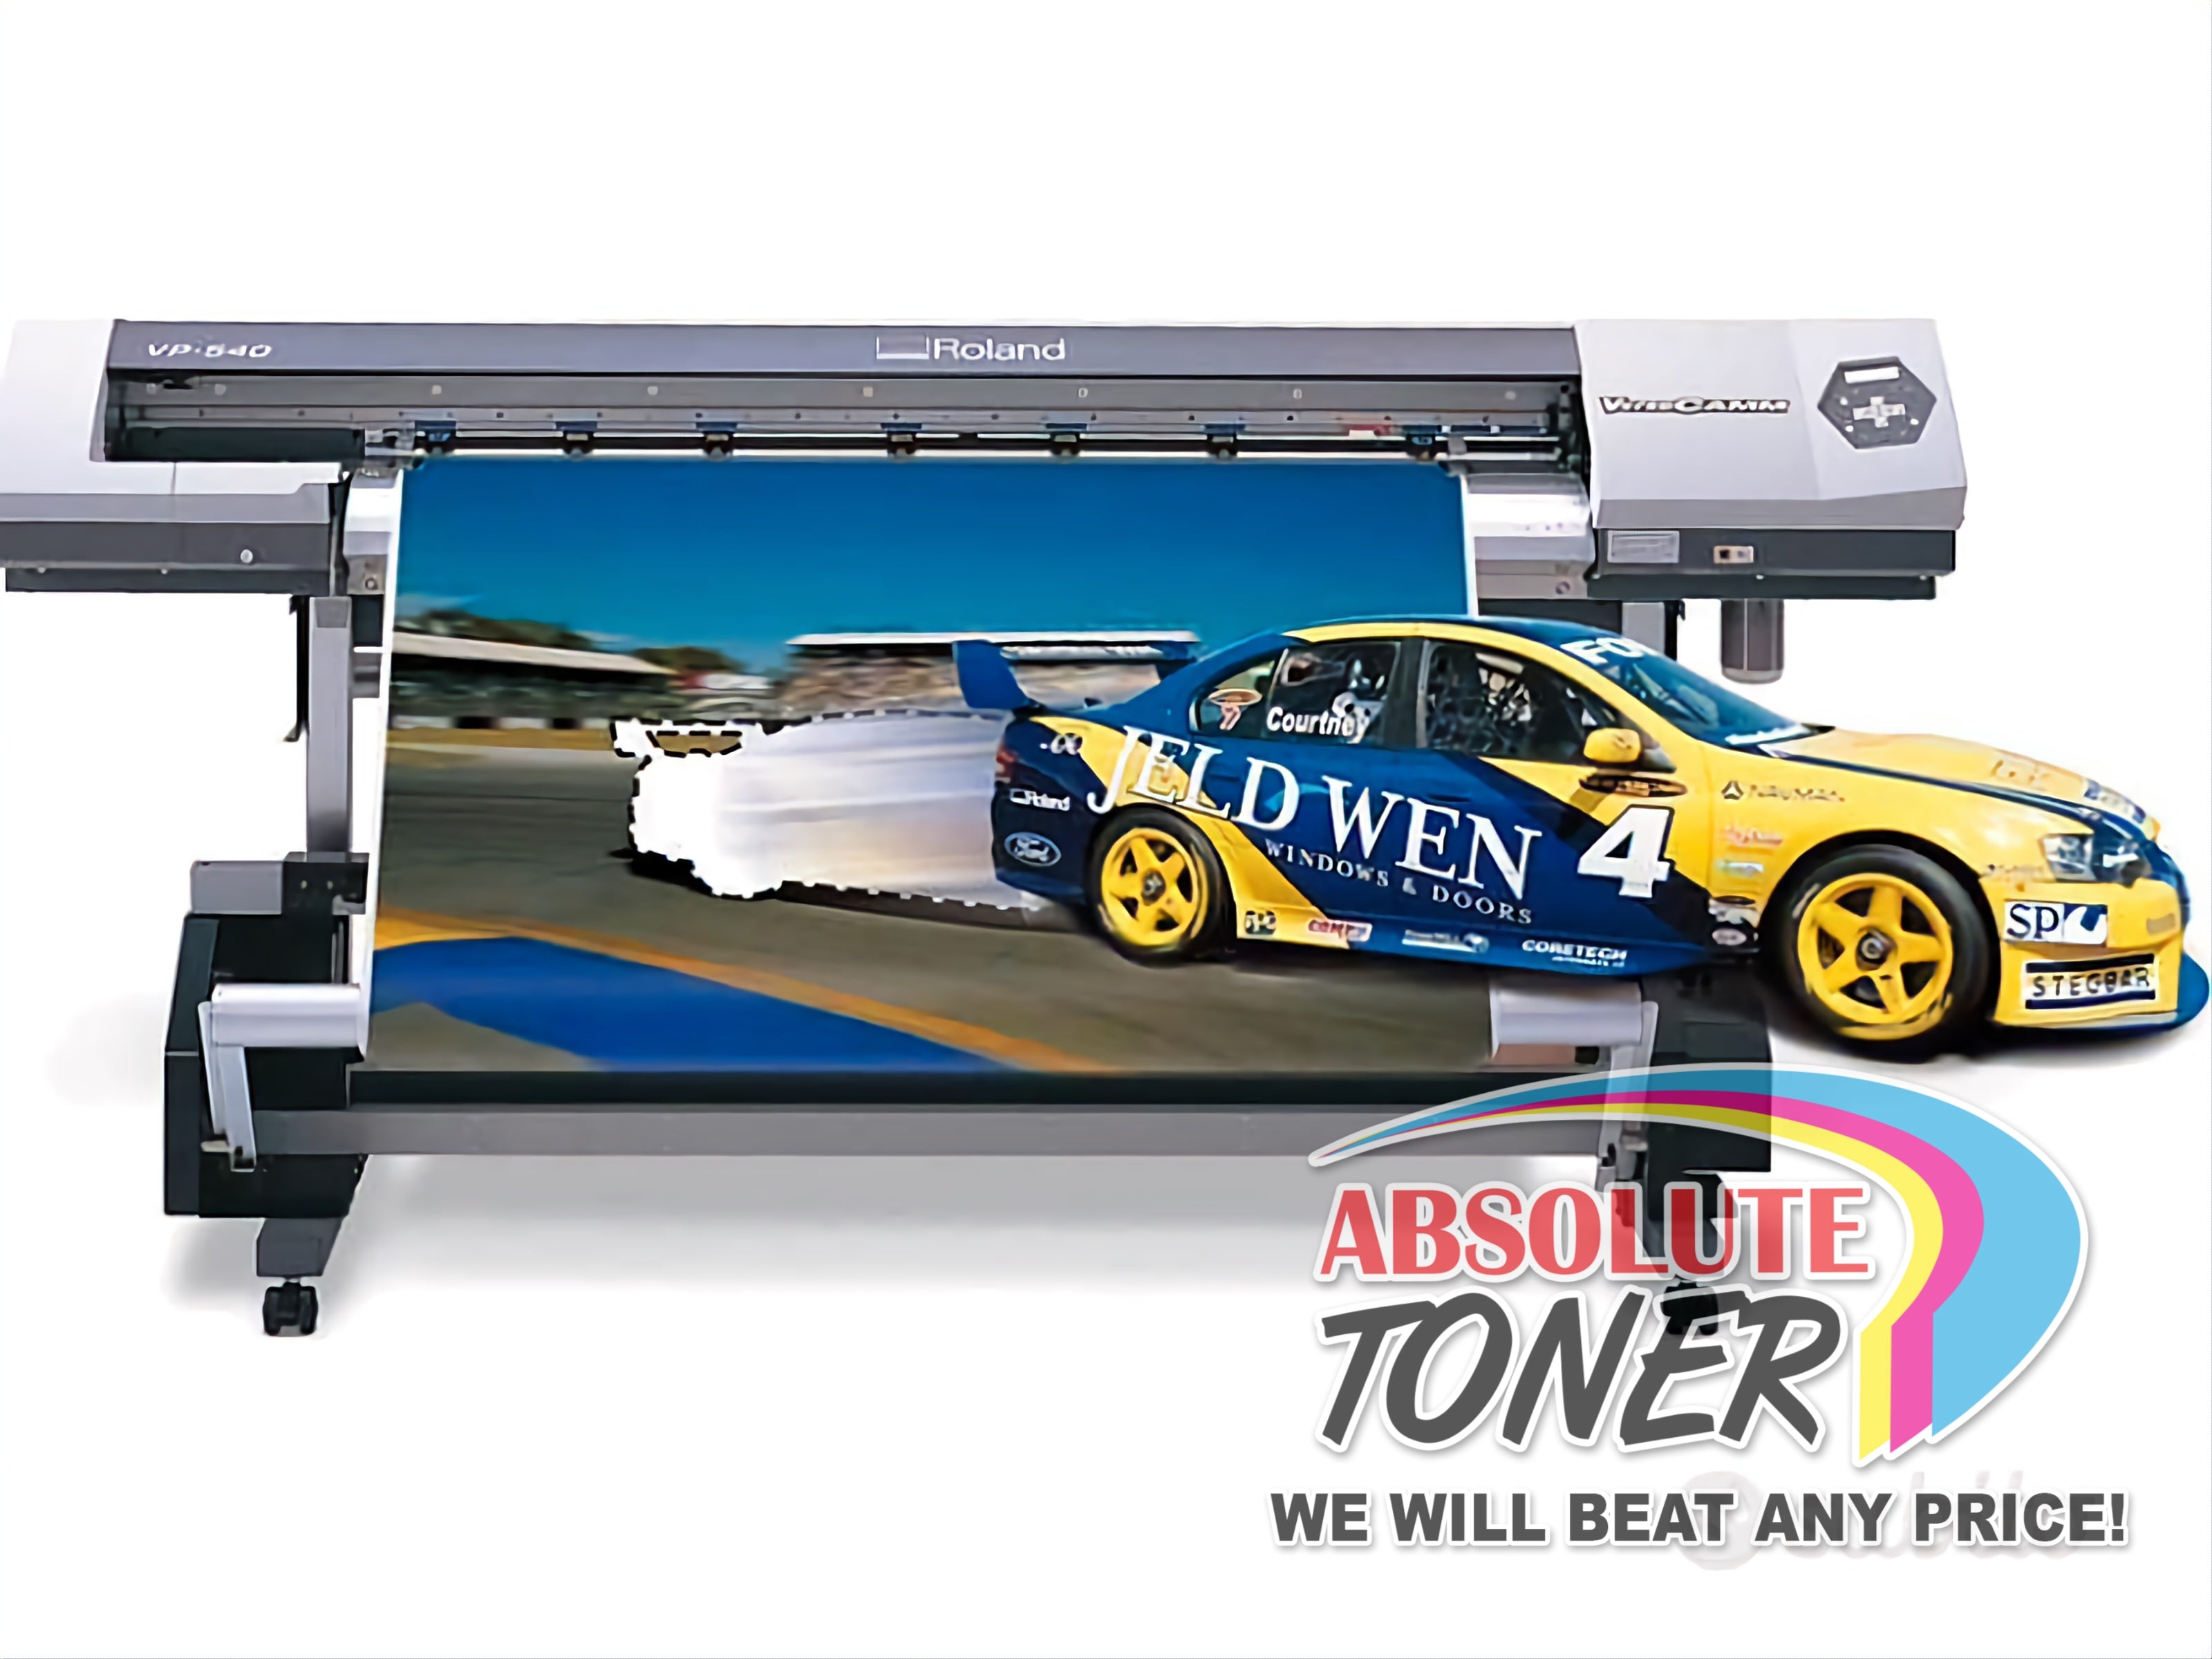 Absolute Toner $169/MONTH Roland VersaCAMM VP-540i 54" Large Format Printer/Cutter Sign Apparel, Car Graphics, Wrapping, Window Tinting, Packaging Print and Cut Plotters